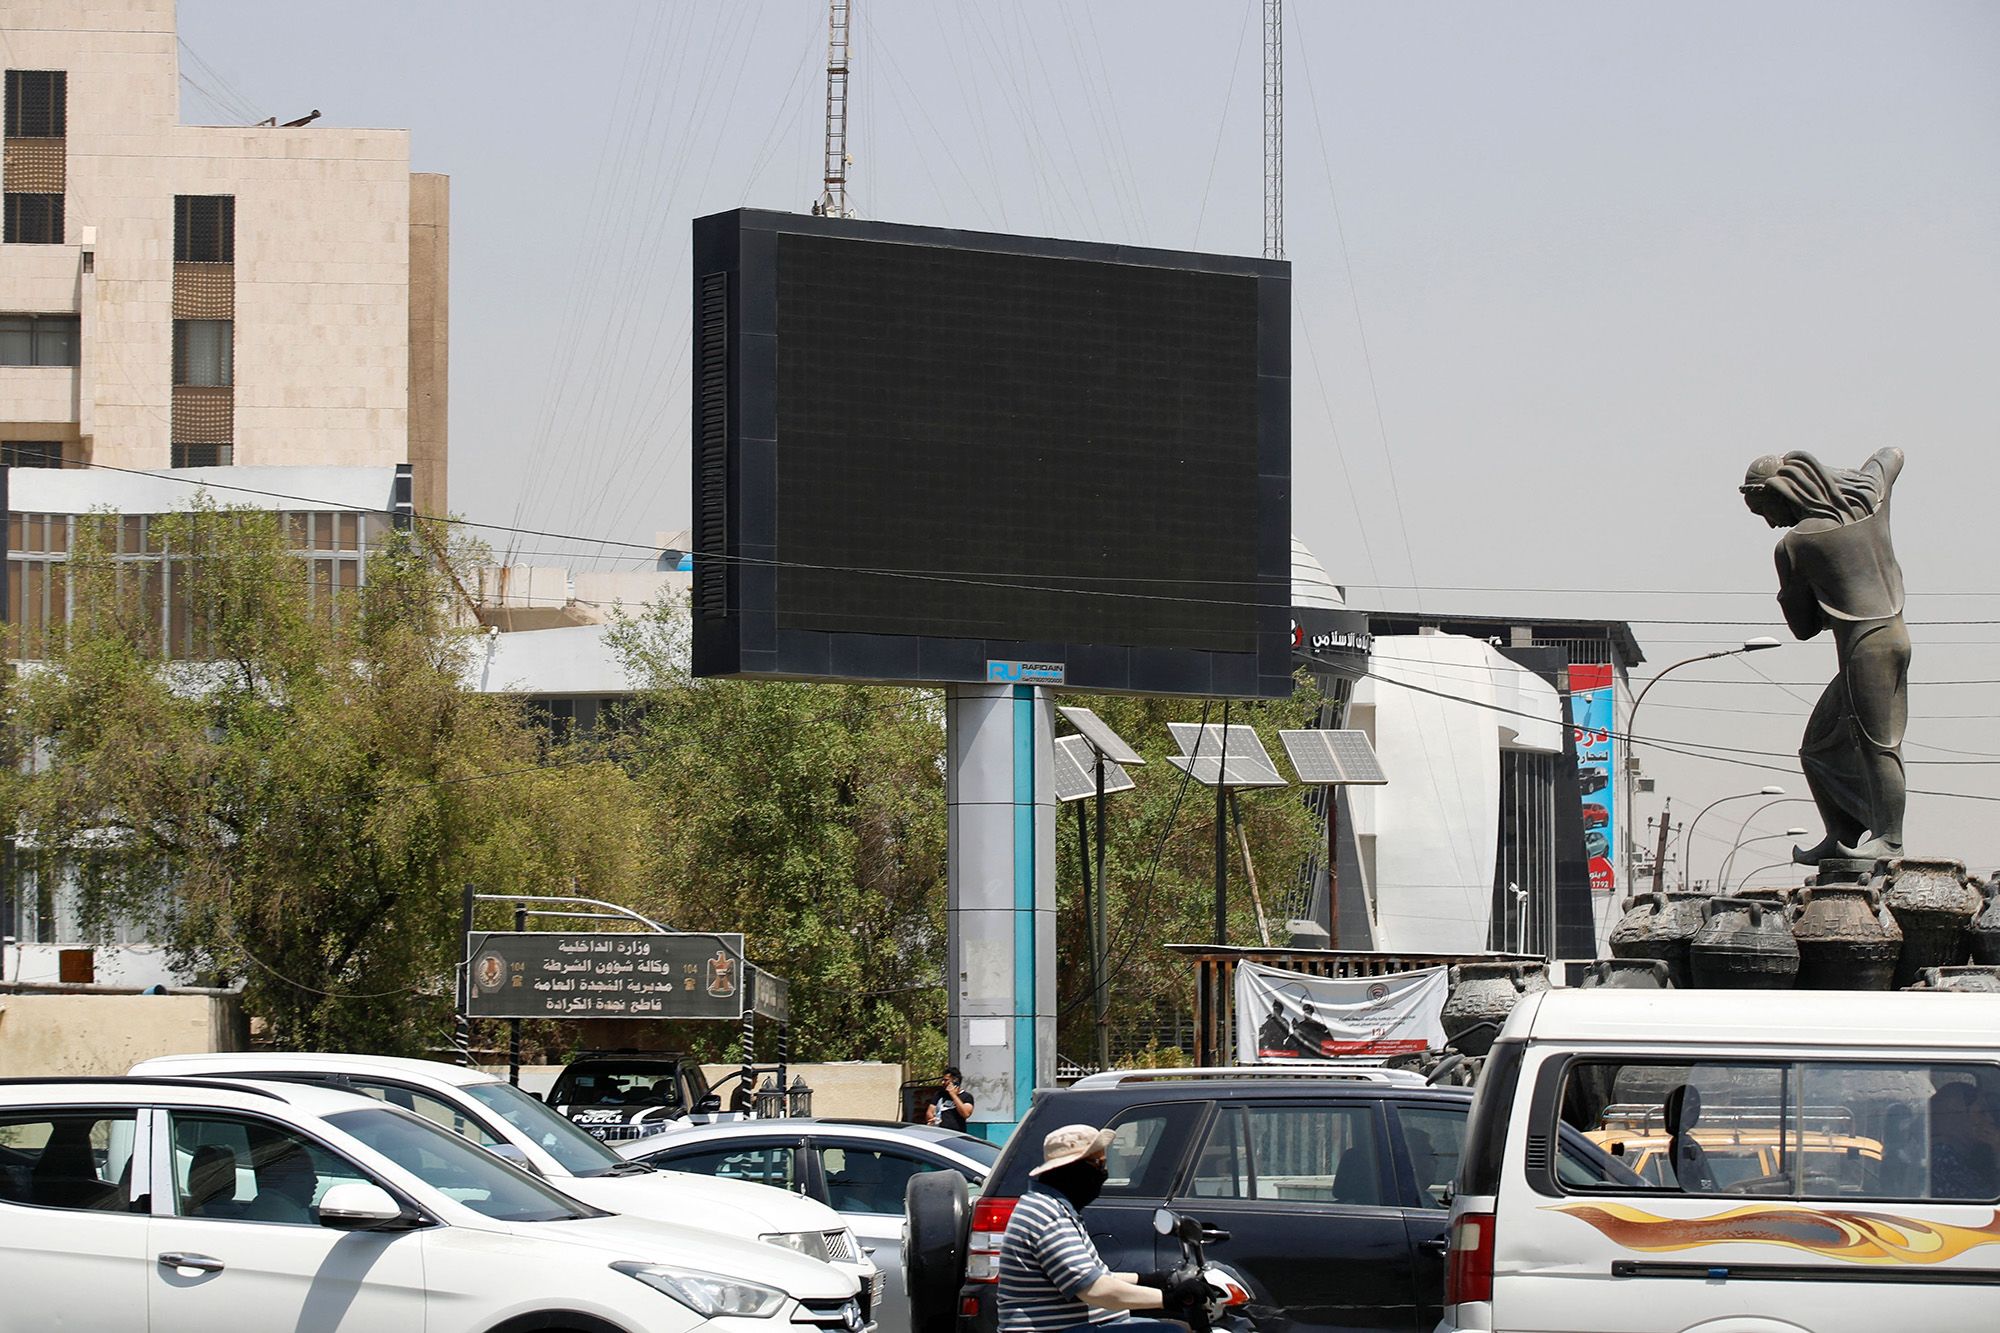 Xxxpurnvideo - Iraq turns off electronic billboards after hacker broadcasts porn to  Baghdad passers-by | CNN